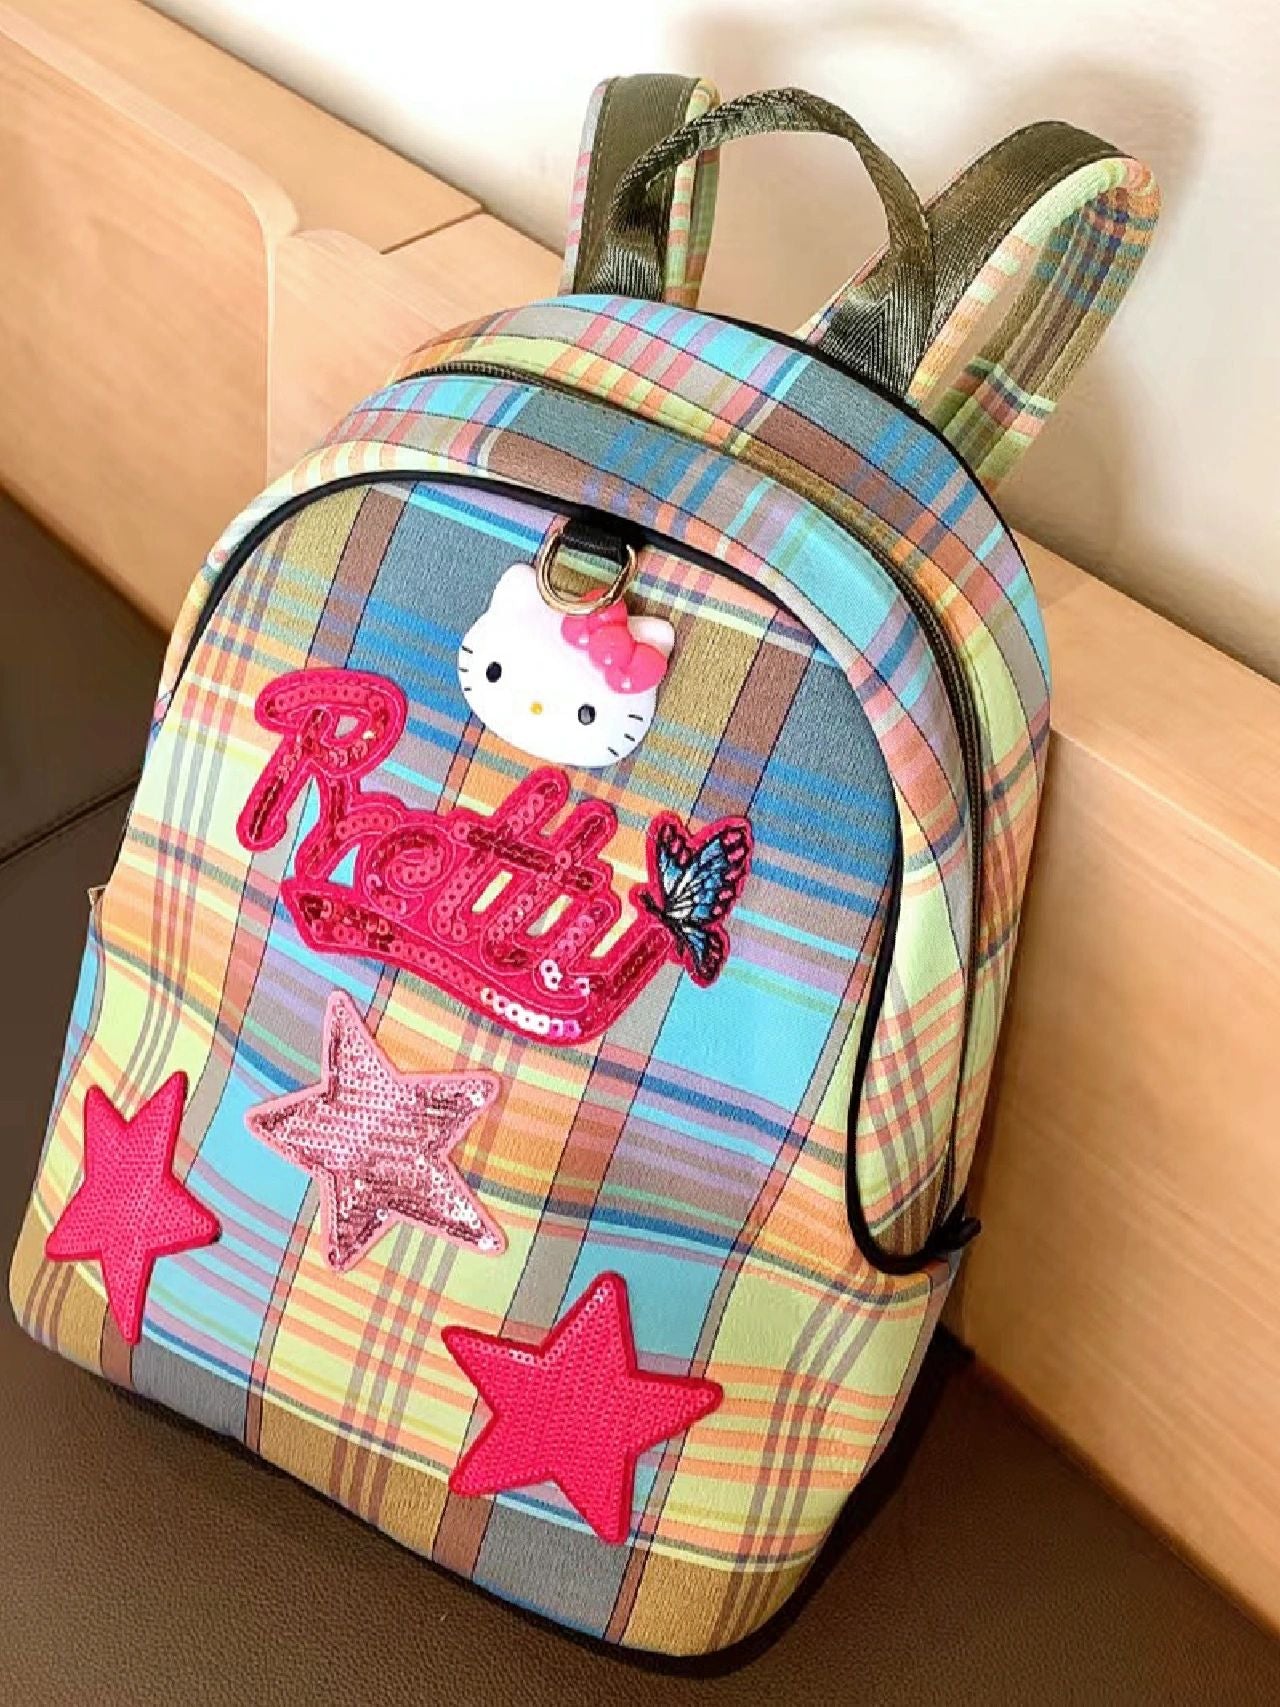 Hellokitty Backpack Laptop Bag Lightweight Cute Backpack with Large Capacity Comfortable Straps Travel Outdoor